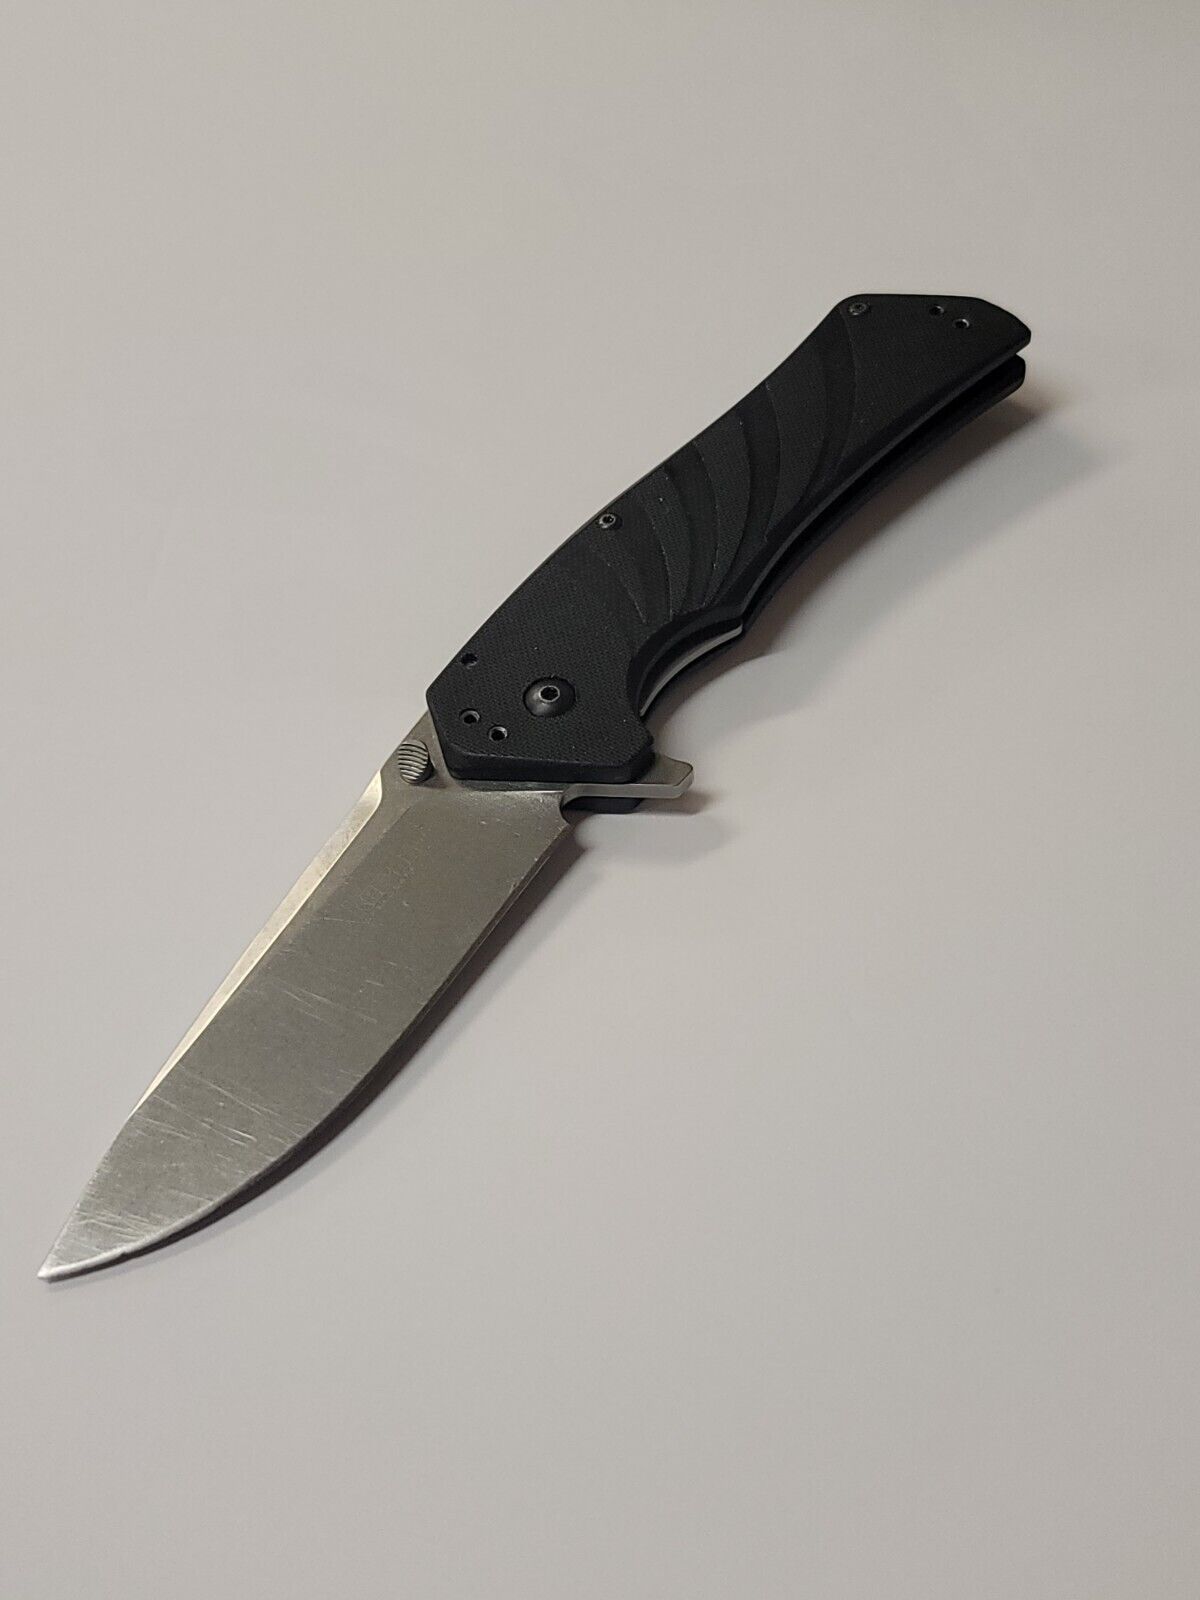 Kershaw Piston Knife 1860 - Made IN USA - (Discontinued)